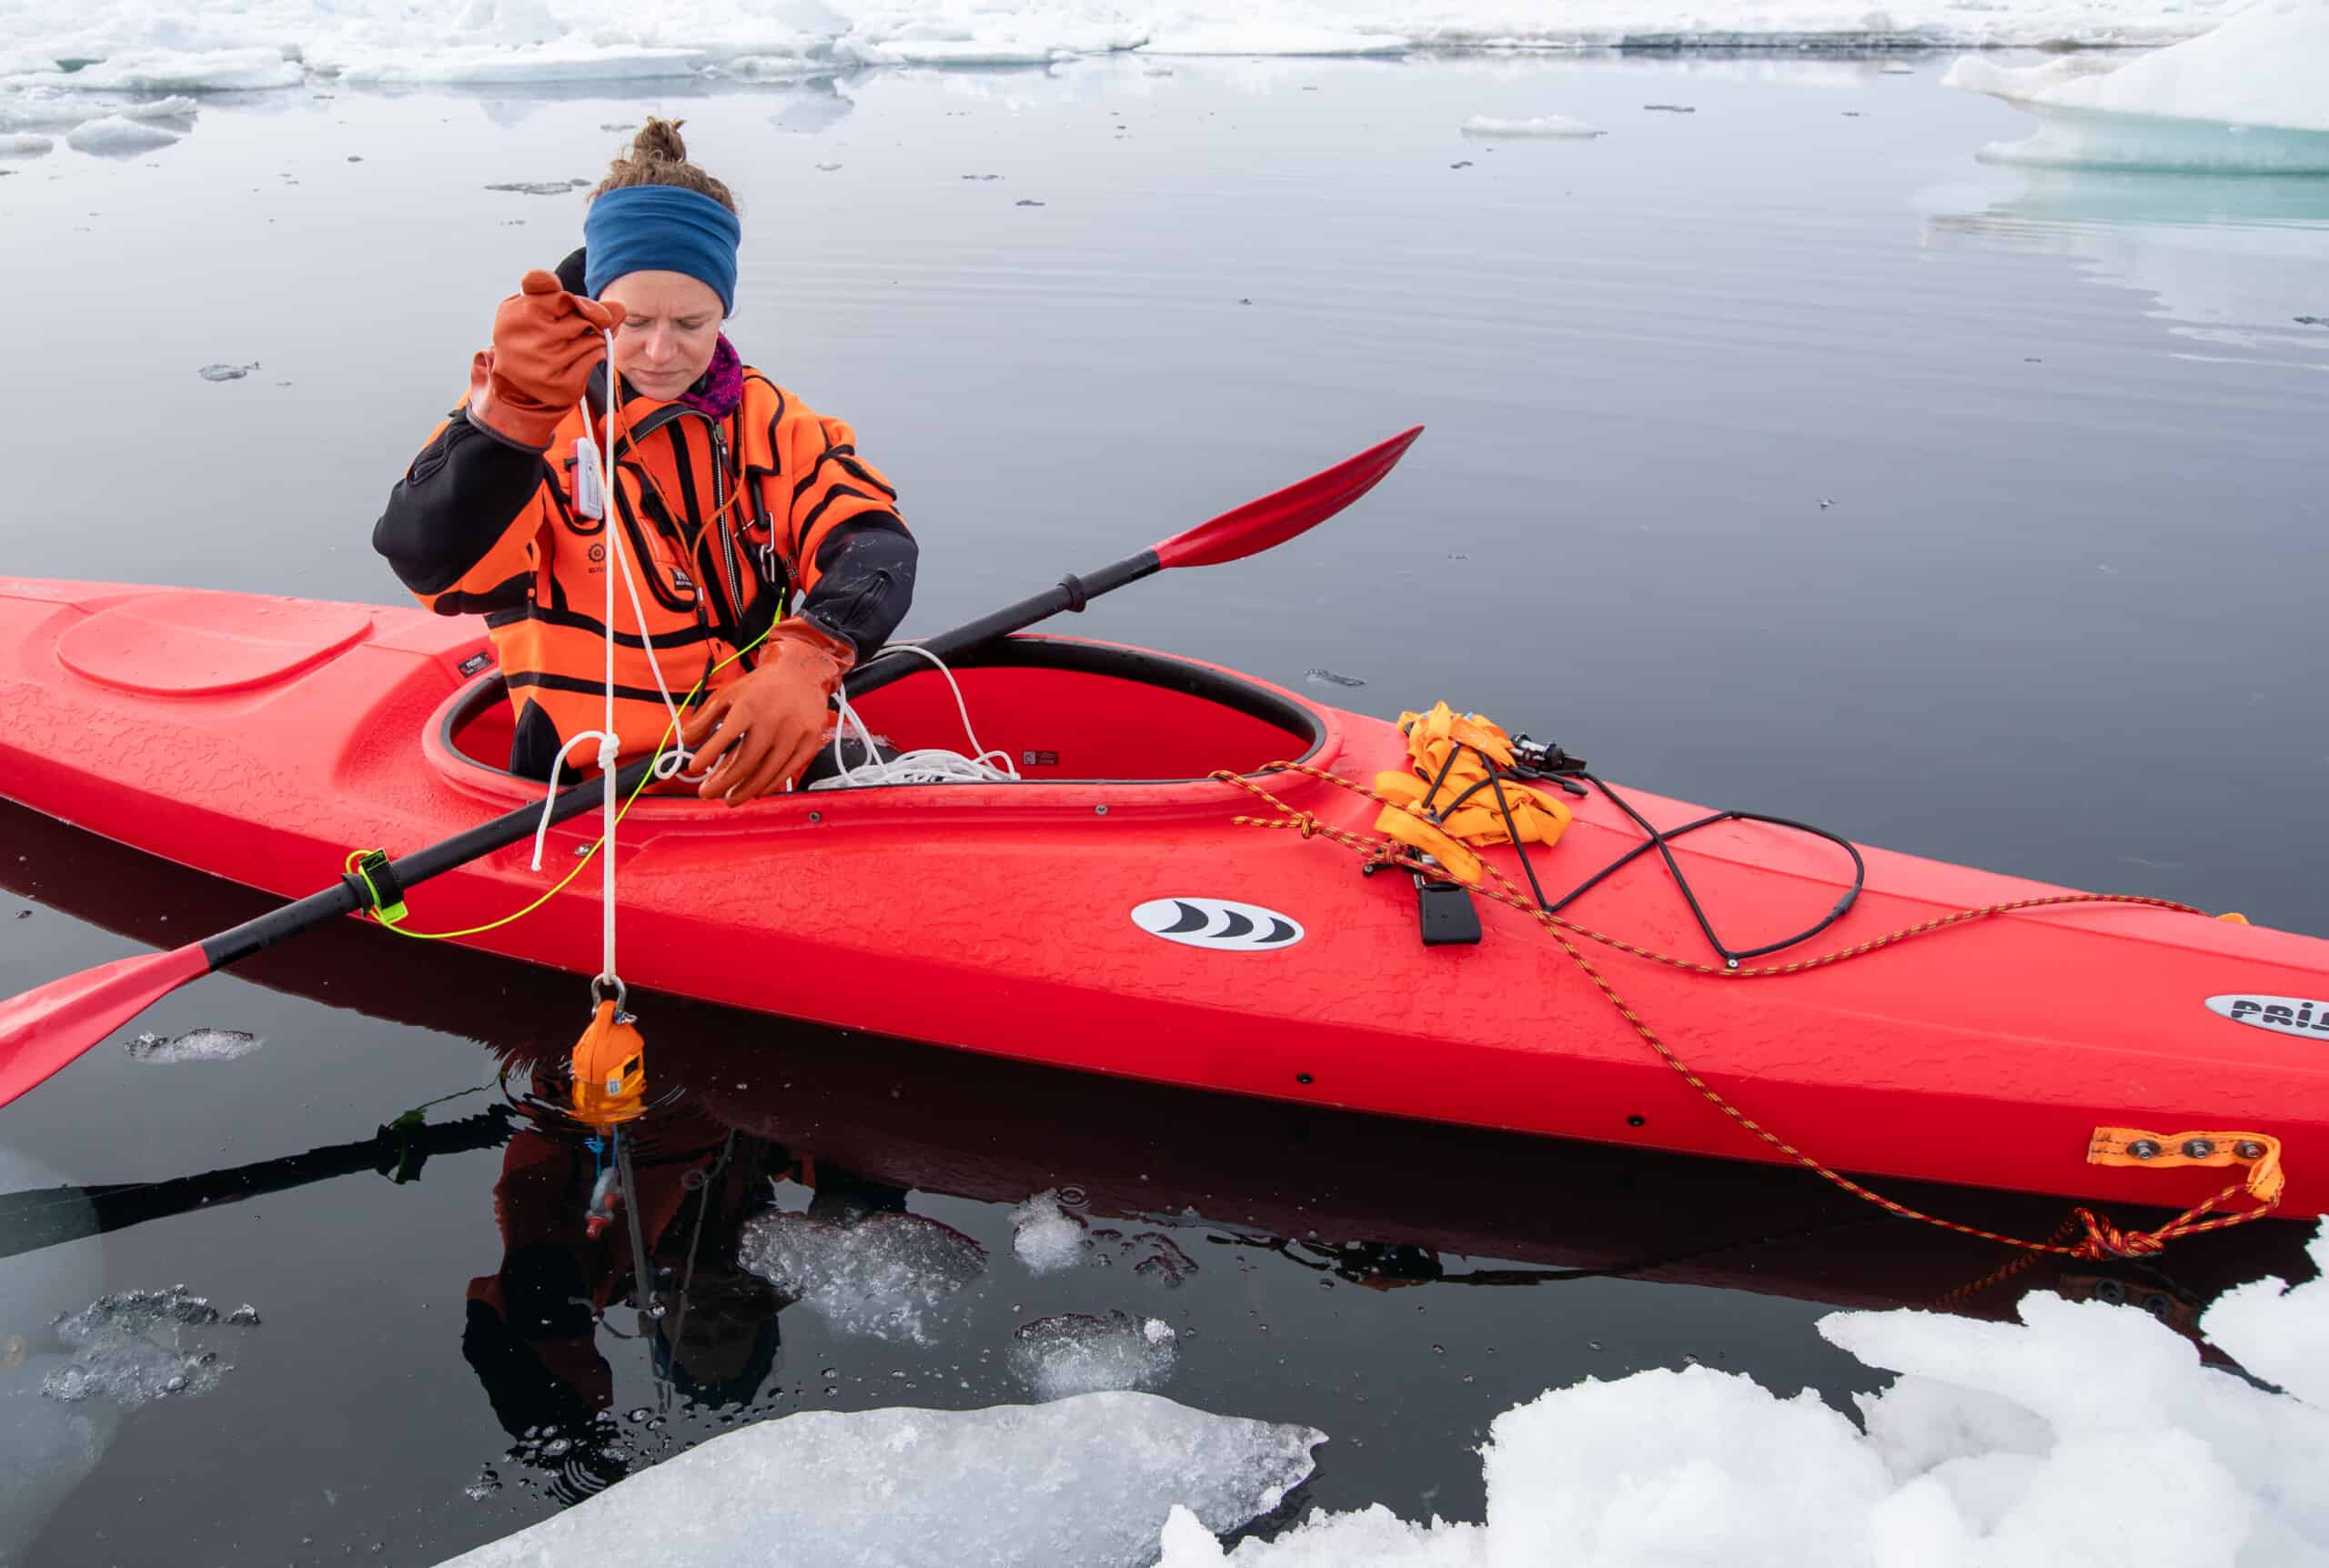 A researcher is sitting in a kayak holding a line attached to a scientific instrument, the water is calm, with large pieces of ice in the foreground and background